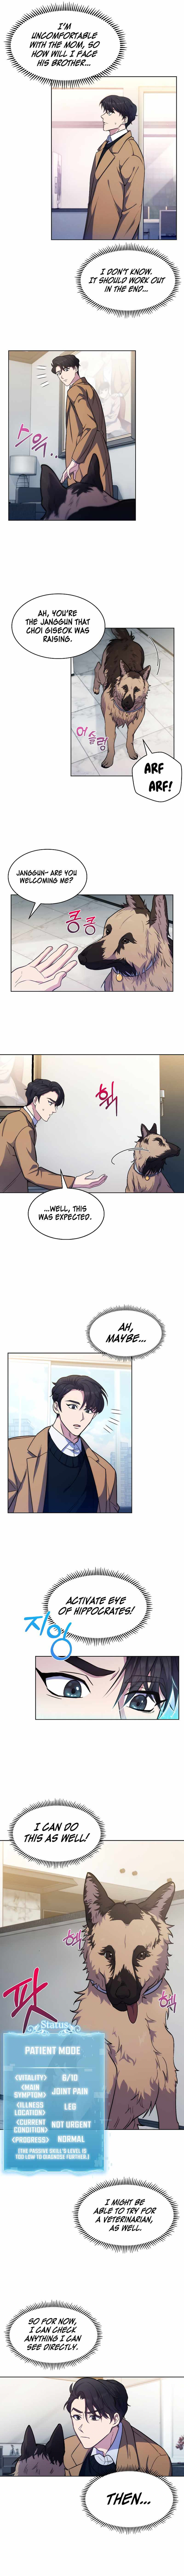 Level-Up Doctor (Manhwa) - Page 3